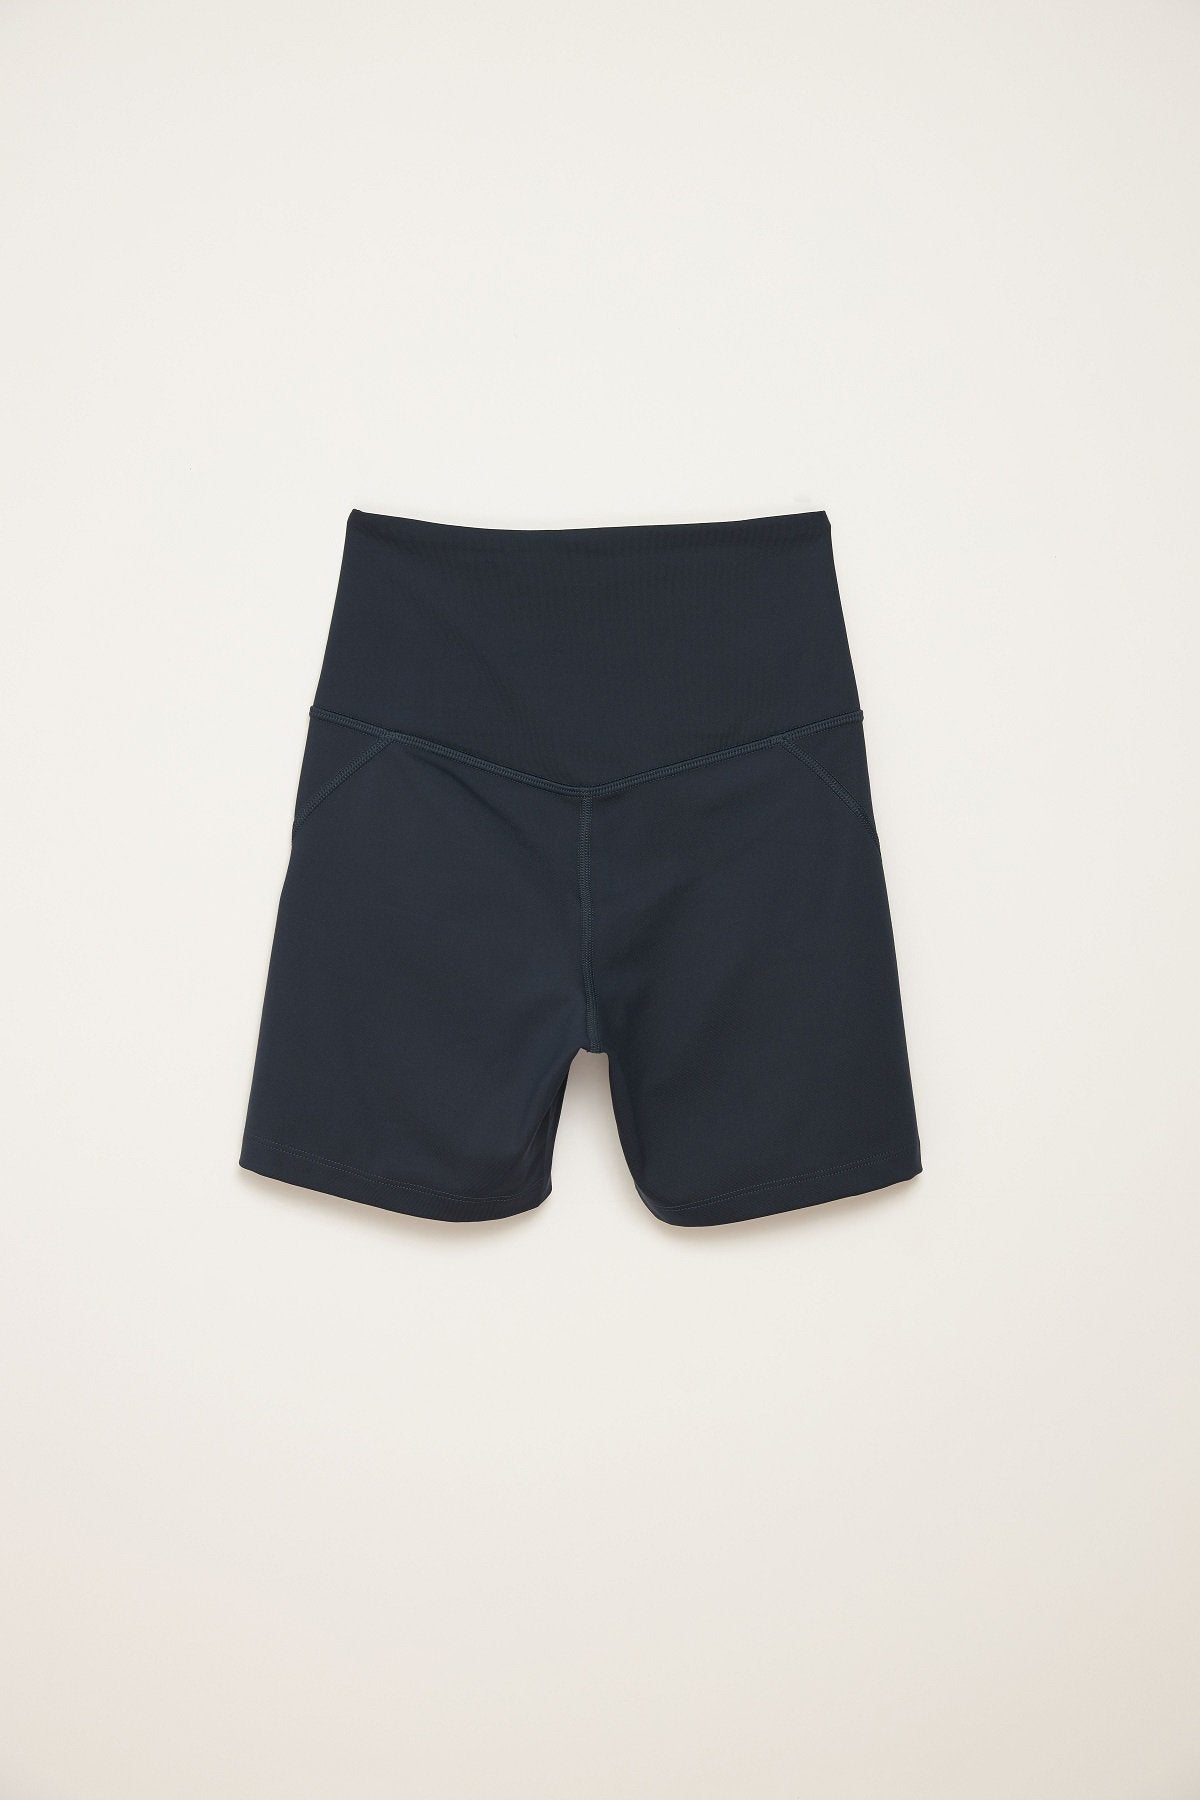 Girlfriend Collective Run Shorts High-Rise - Made from Recycled Plastic Bottles Midnight Pants